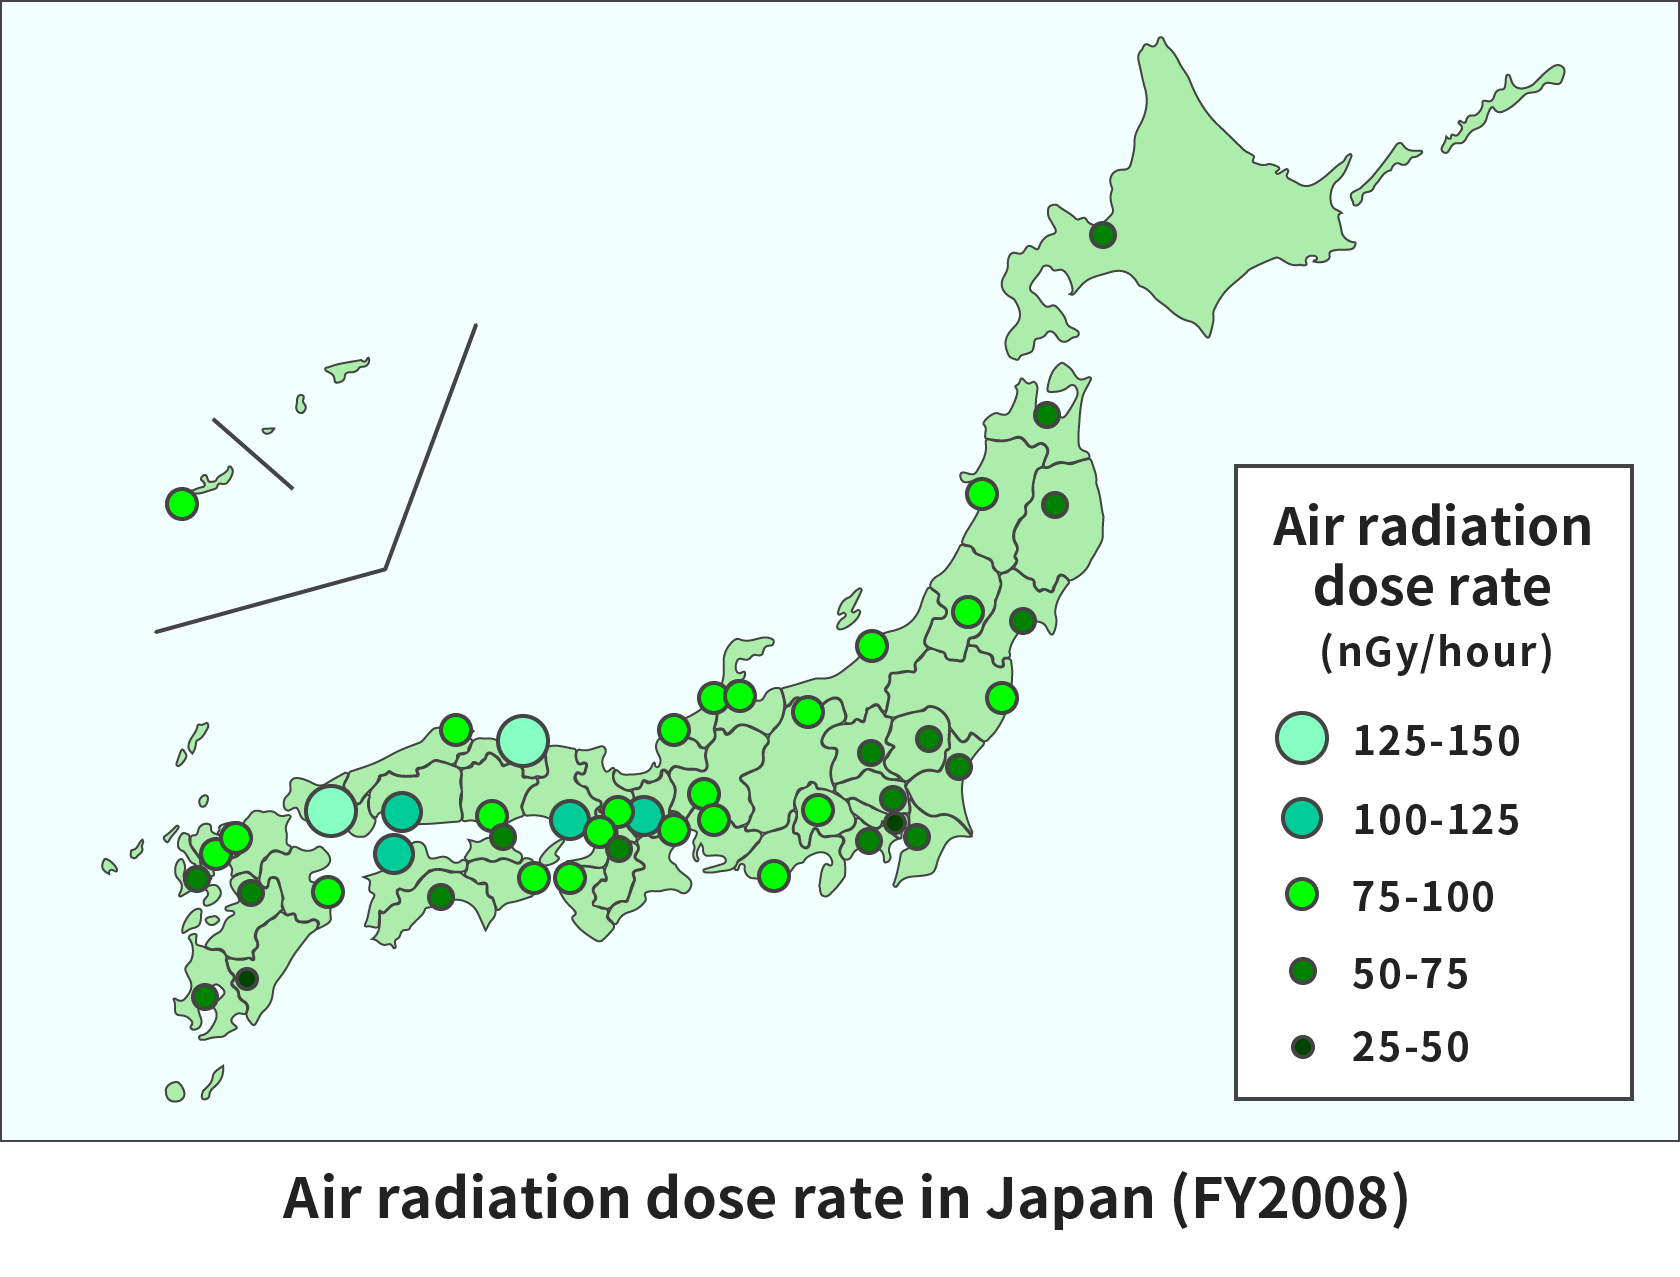 Are there any regional differences in the radiation dose?